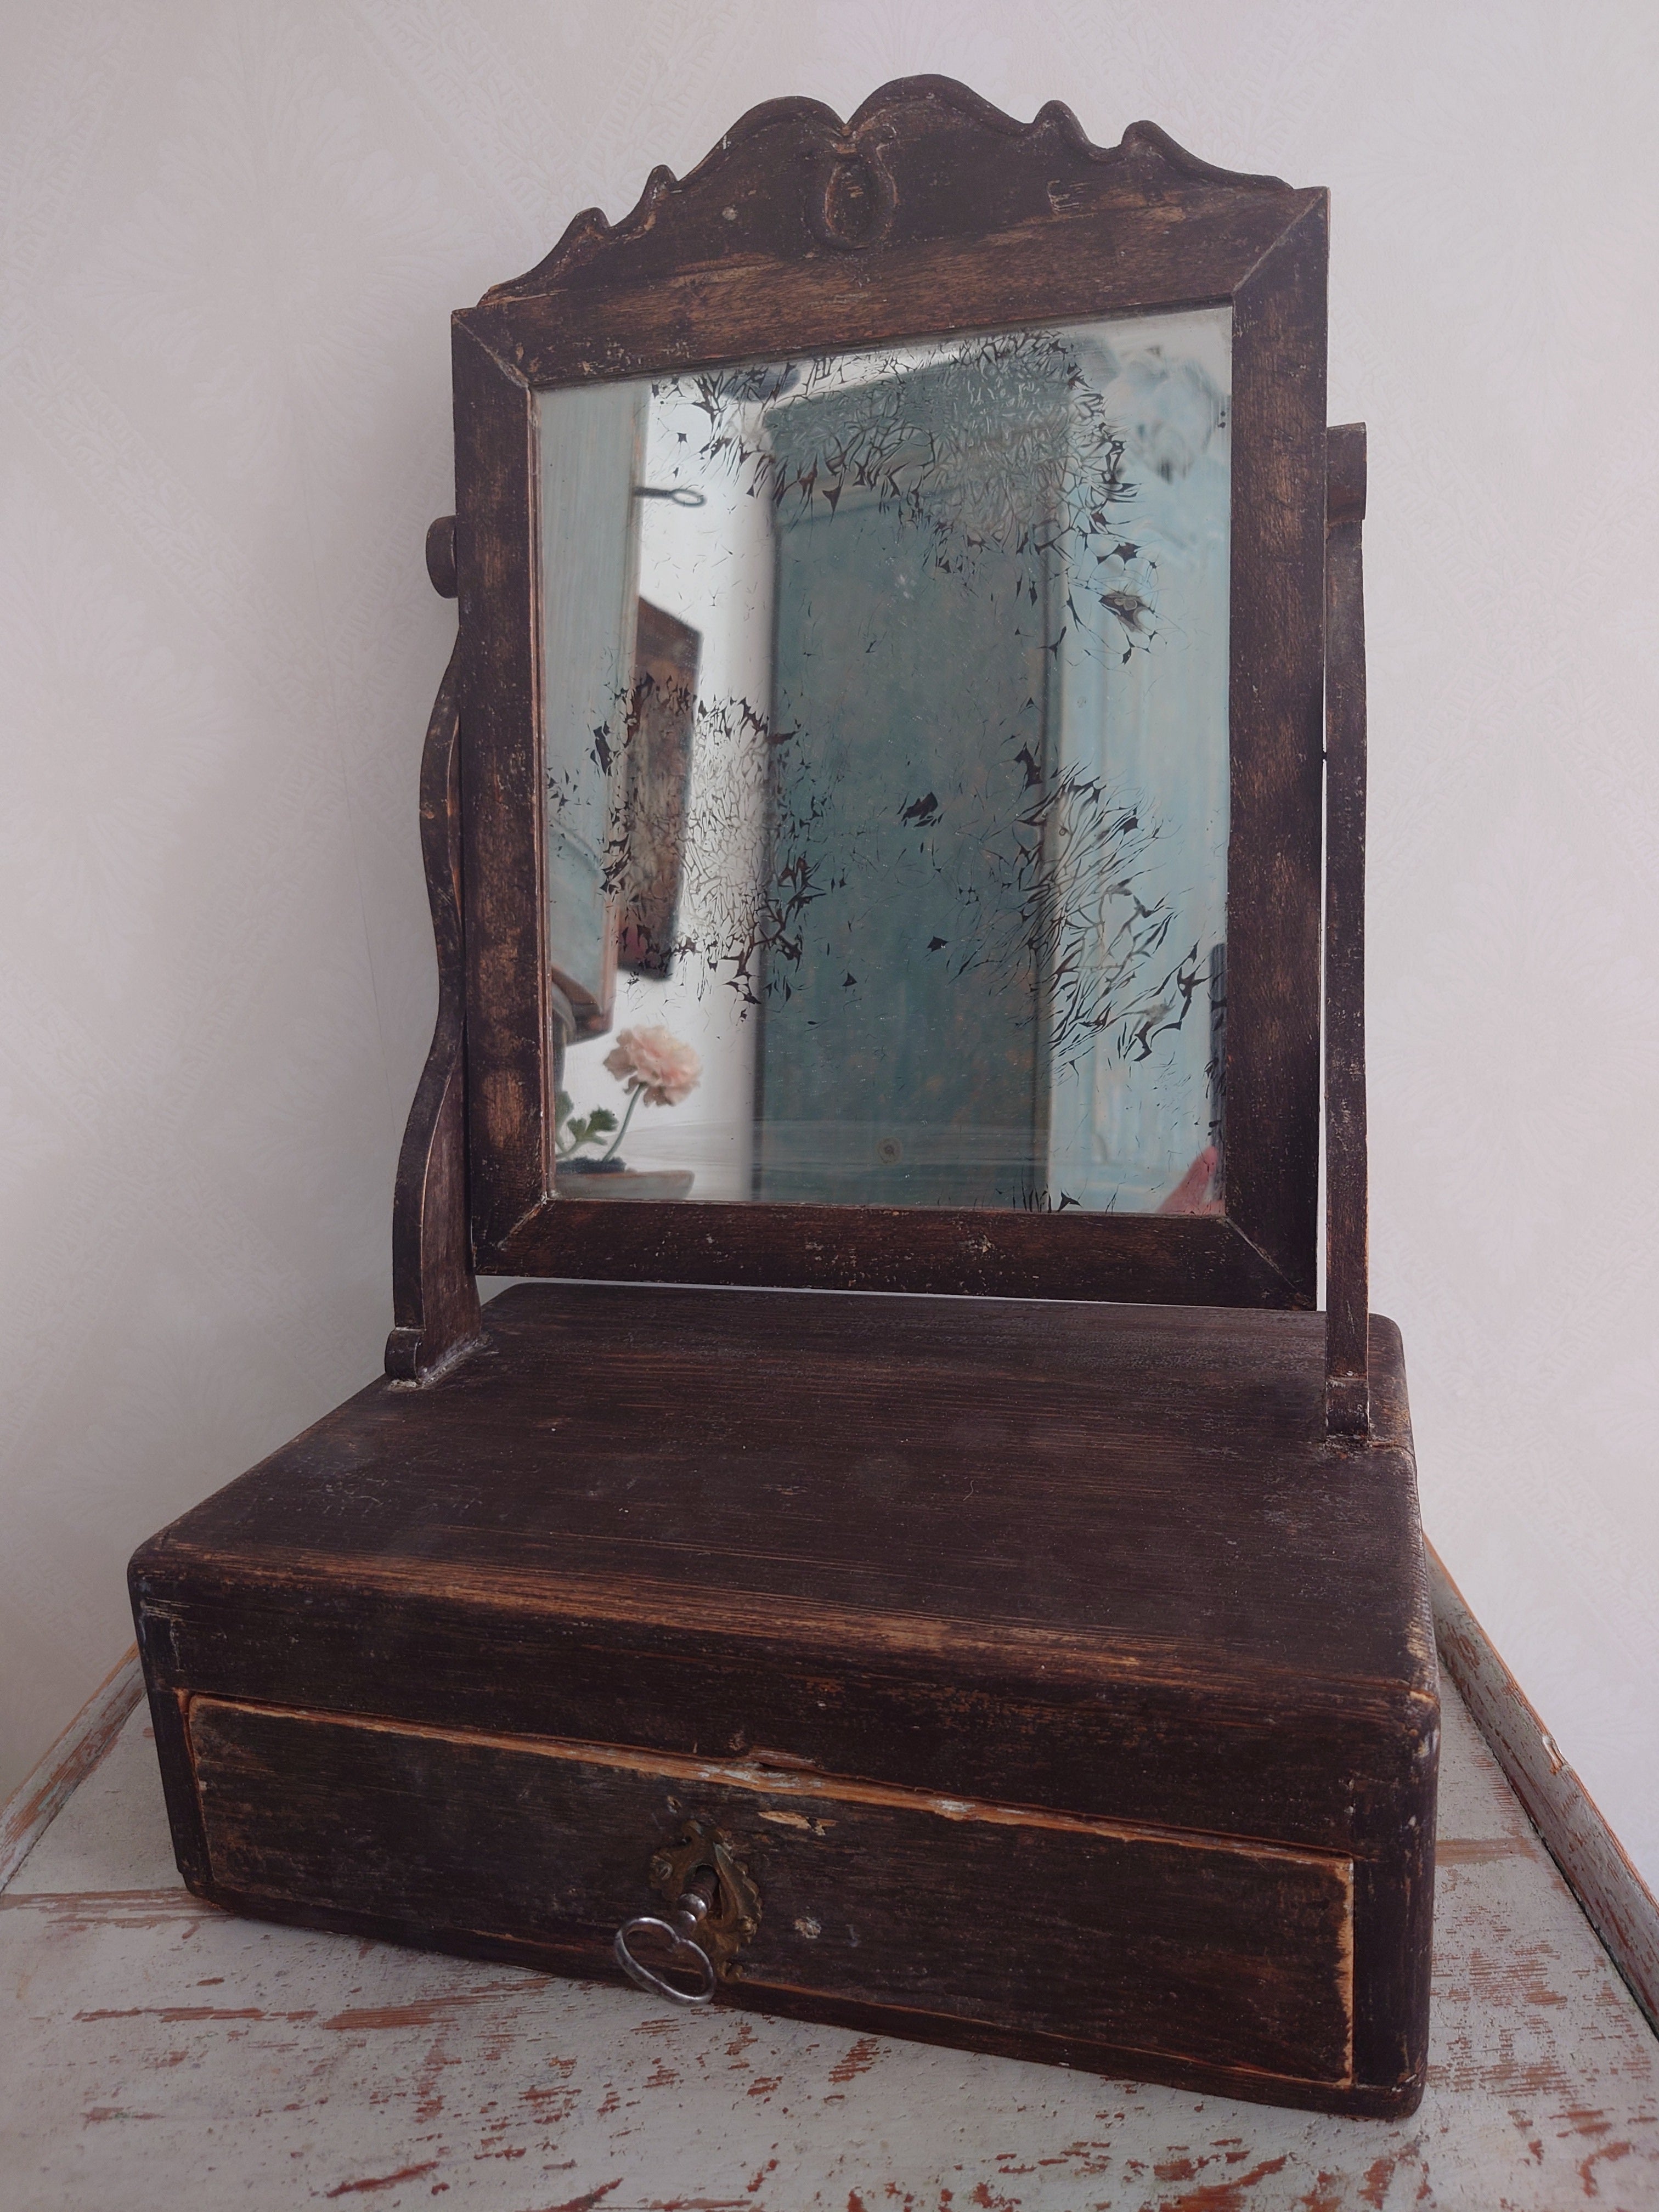 19th century Swedish antique rustic vanity mirror / table mirror dated 1870.
The Mirror has nice carved details on the top
 This orginal painted mirror has a drawer where comb, brush or other female accessories can be stored. The rural lifestyle